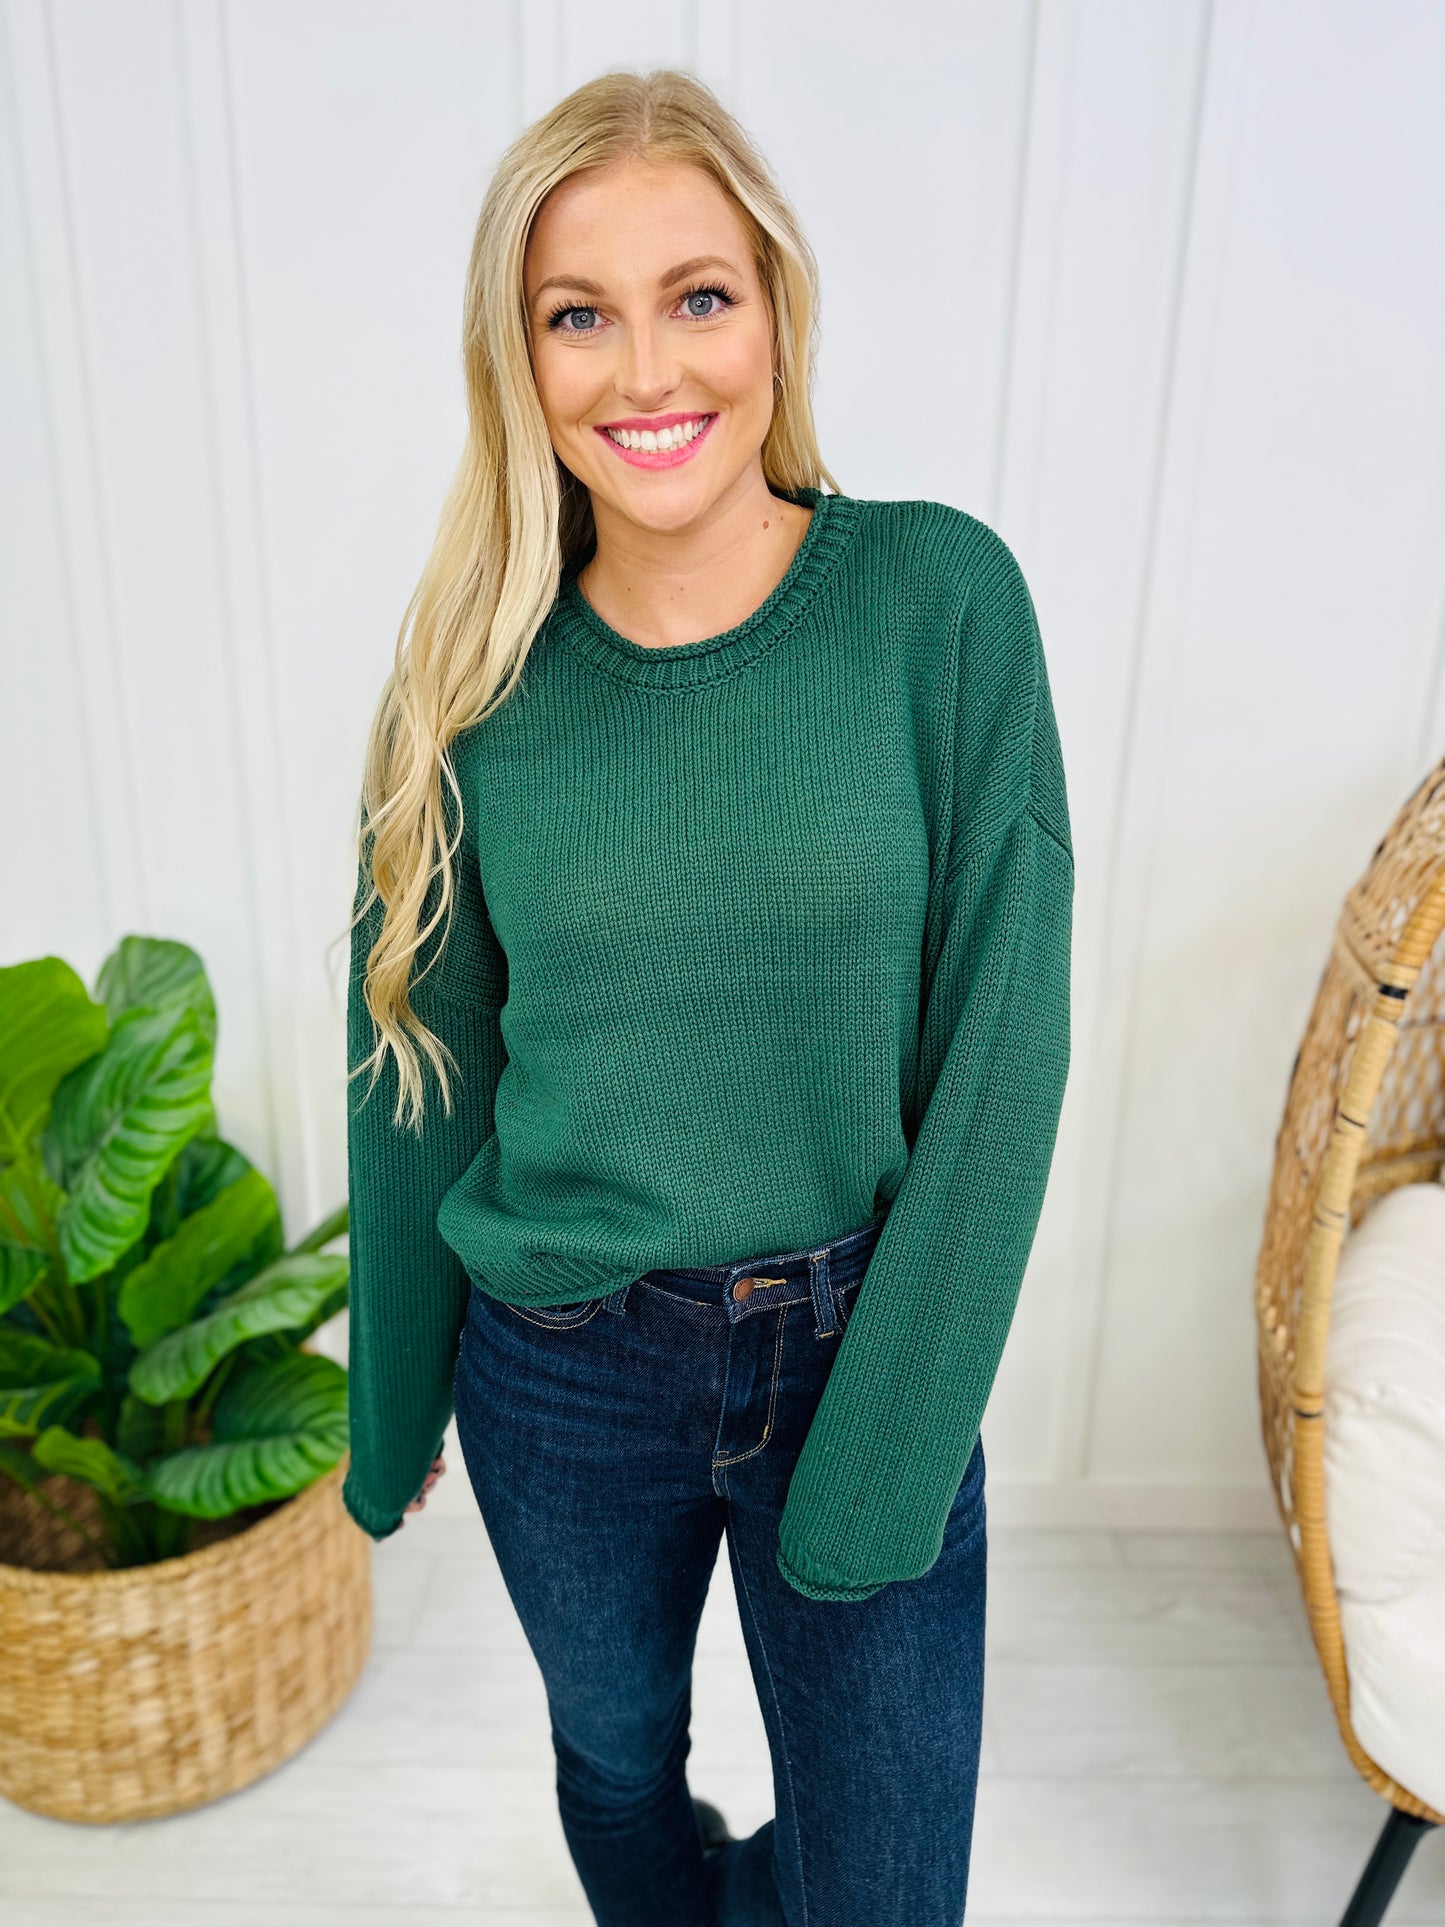 DOORBUSTER! Charming All The Time Sweater- Multiple Colors!